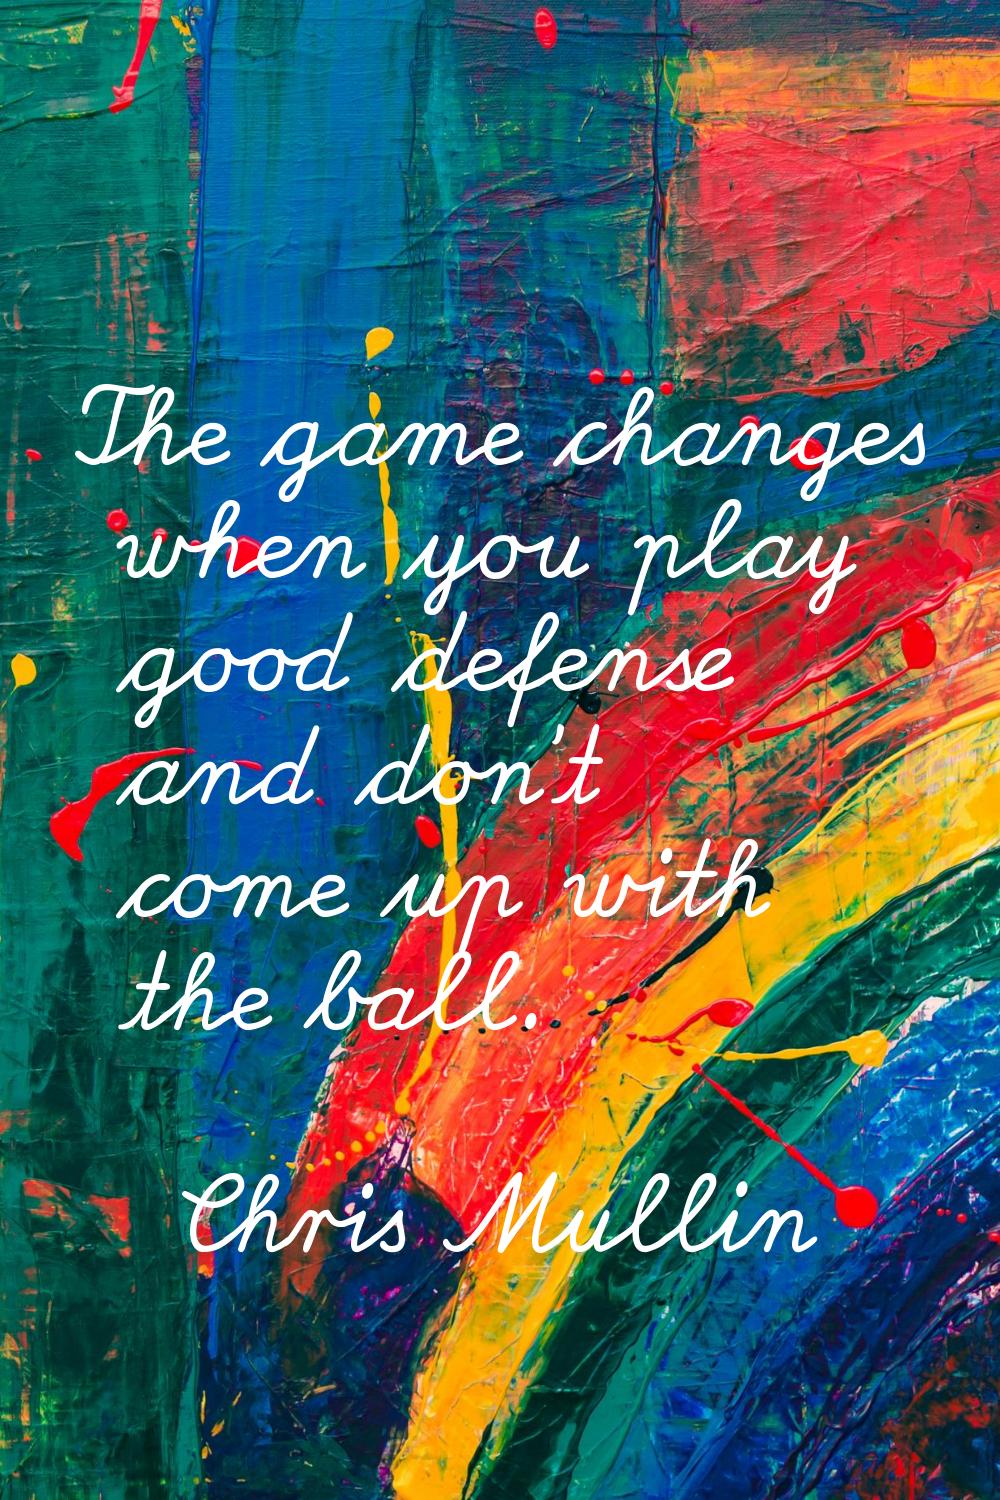 The game changes when you play good defense and don't come up with the ball.